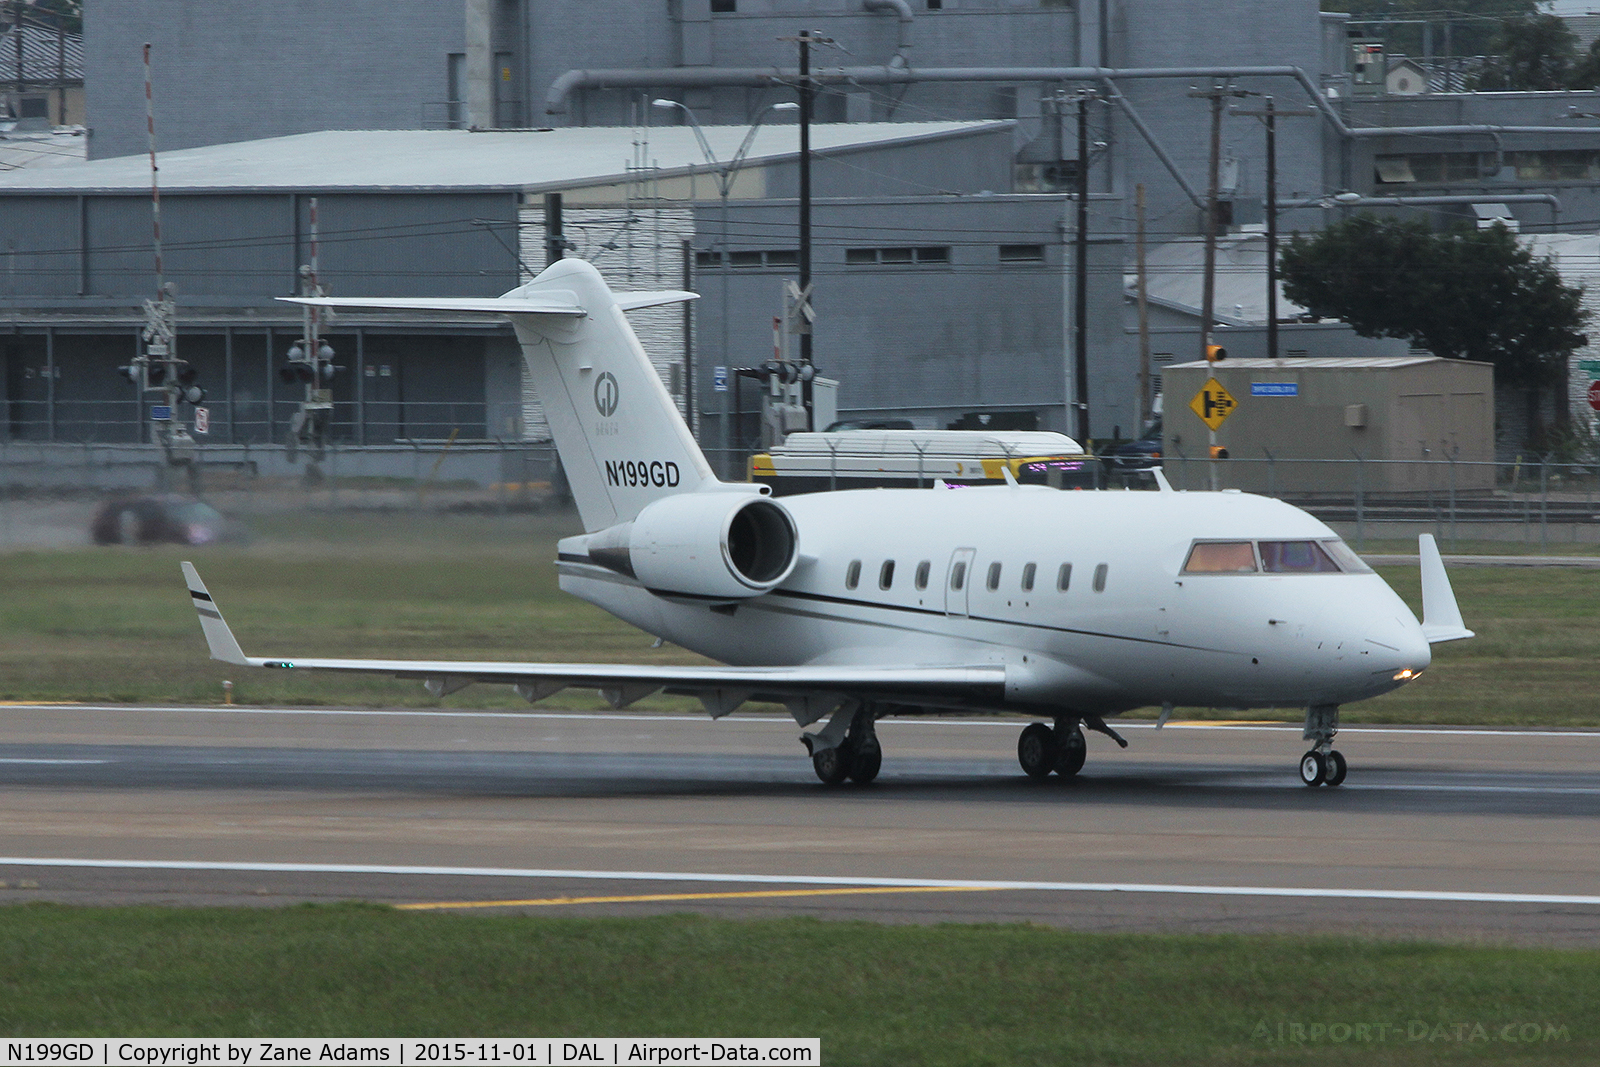 N199GD, 2005 Bombardier Challenger 604 (CL-600-2B16) C/N 5630, At Dallas Love Field